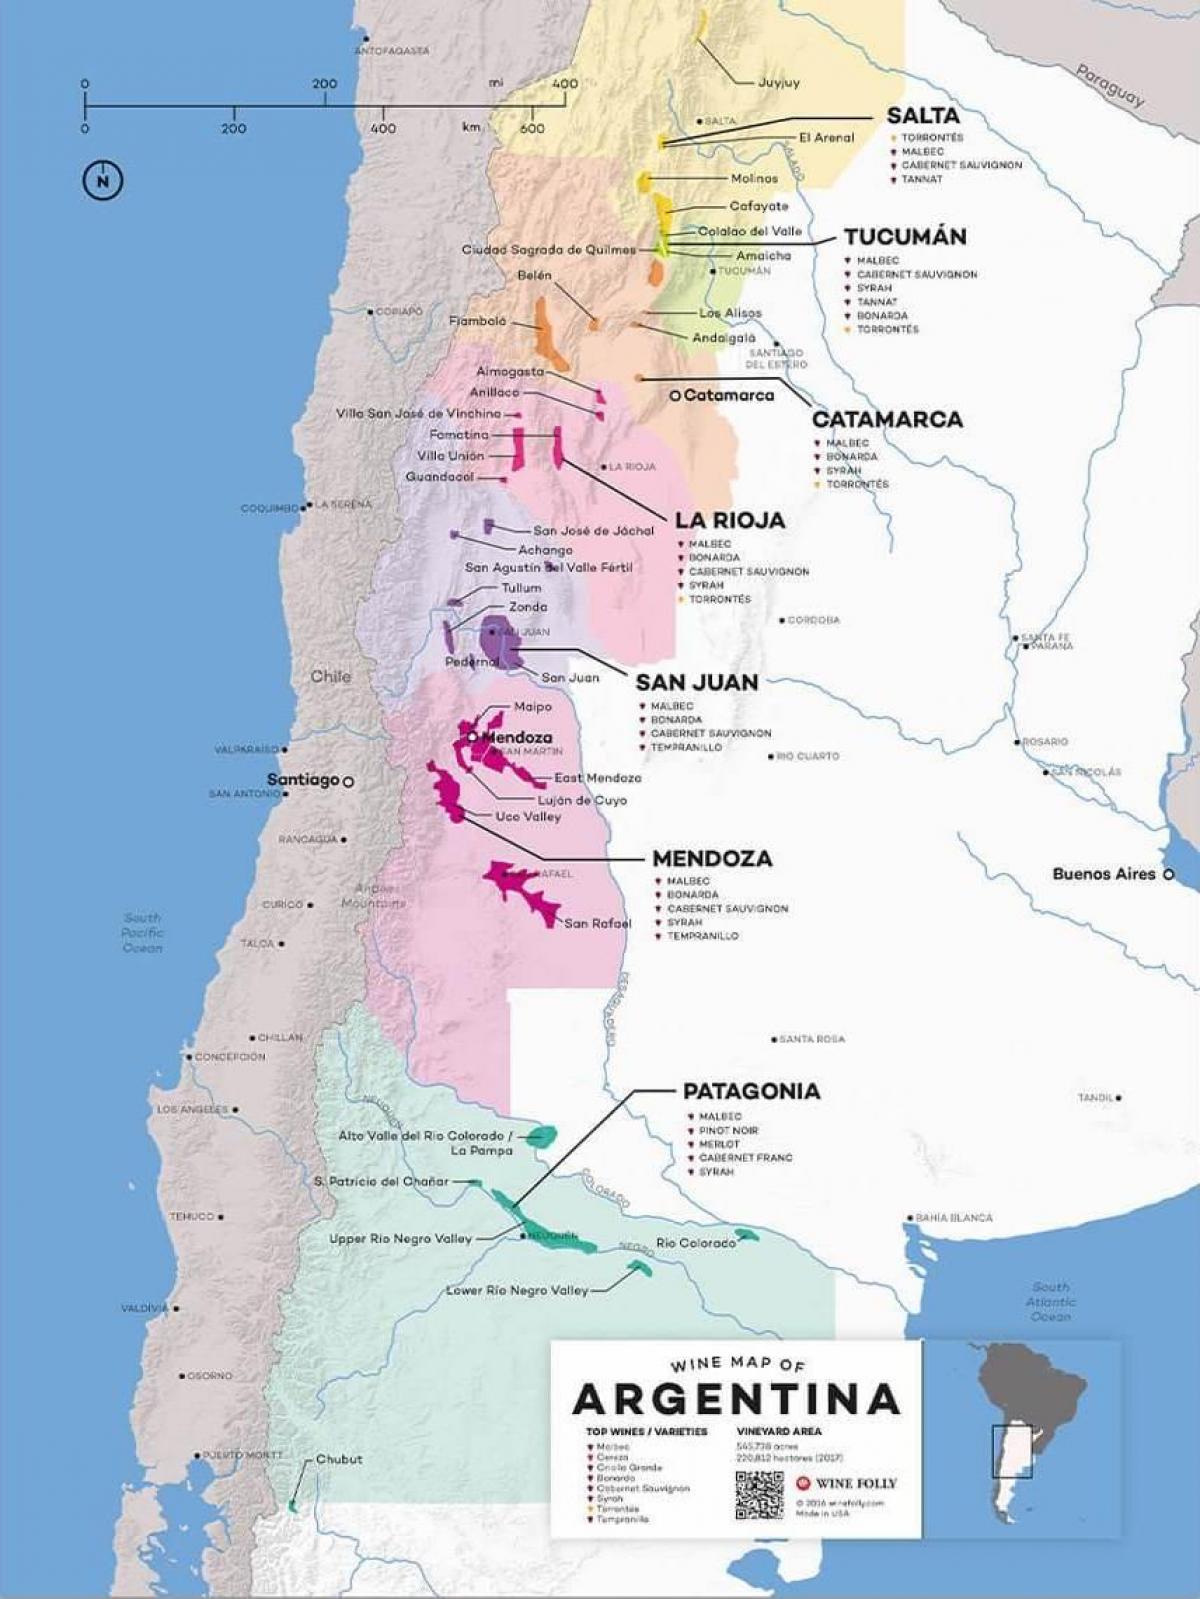 map-of-argentina-wine-wine-regions-and-vineyards-of-argentina